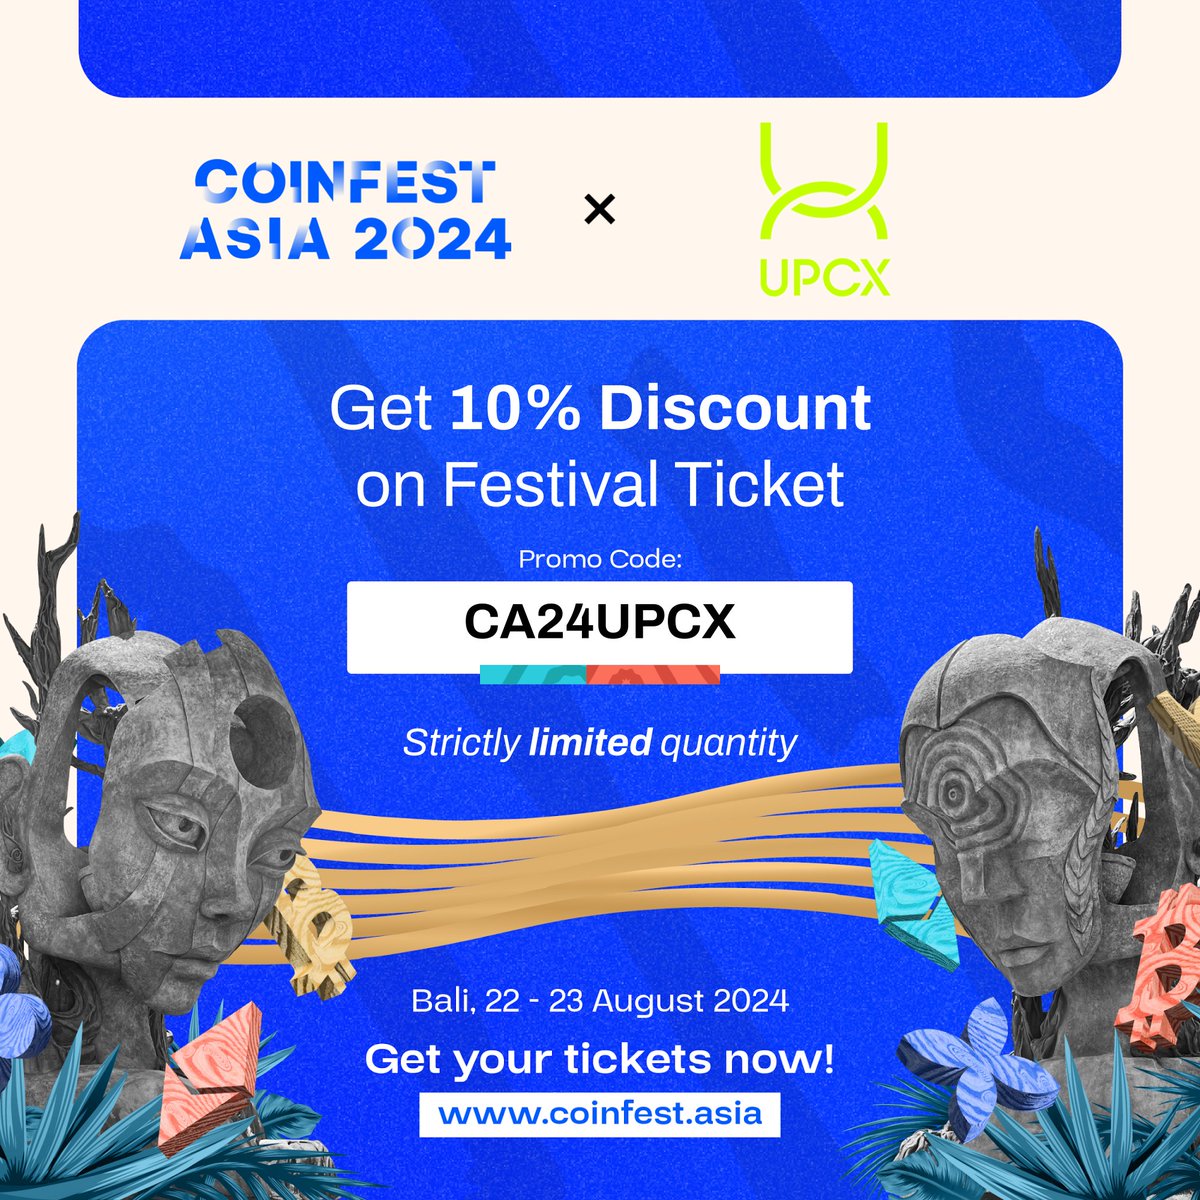 🔥 Exciting new!🥳

🤝We are thrilled to announce UPCX is Coinfest Asia 2024's official partner! @CoinfestAsia 

☀️ Take part in Asia’s immersive Web3 festival, where innovation meets adoption.

🎟 Get your tickets at coinfest.asia and use our special promo code:…